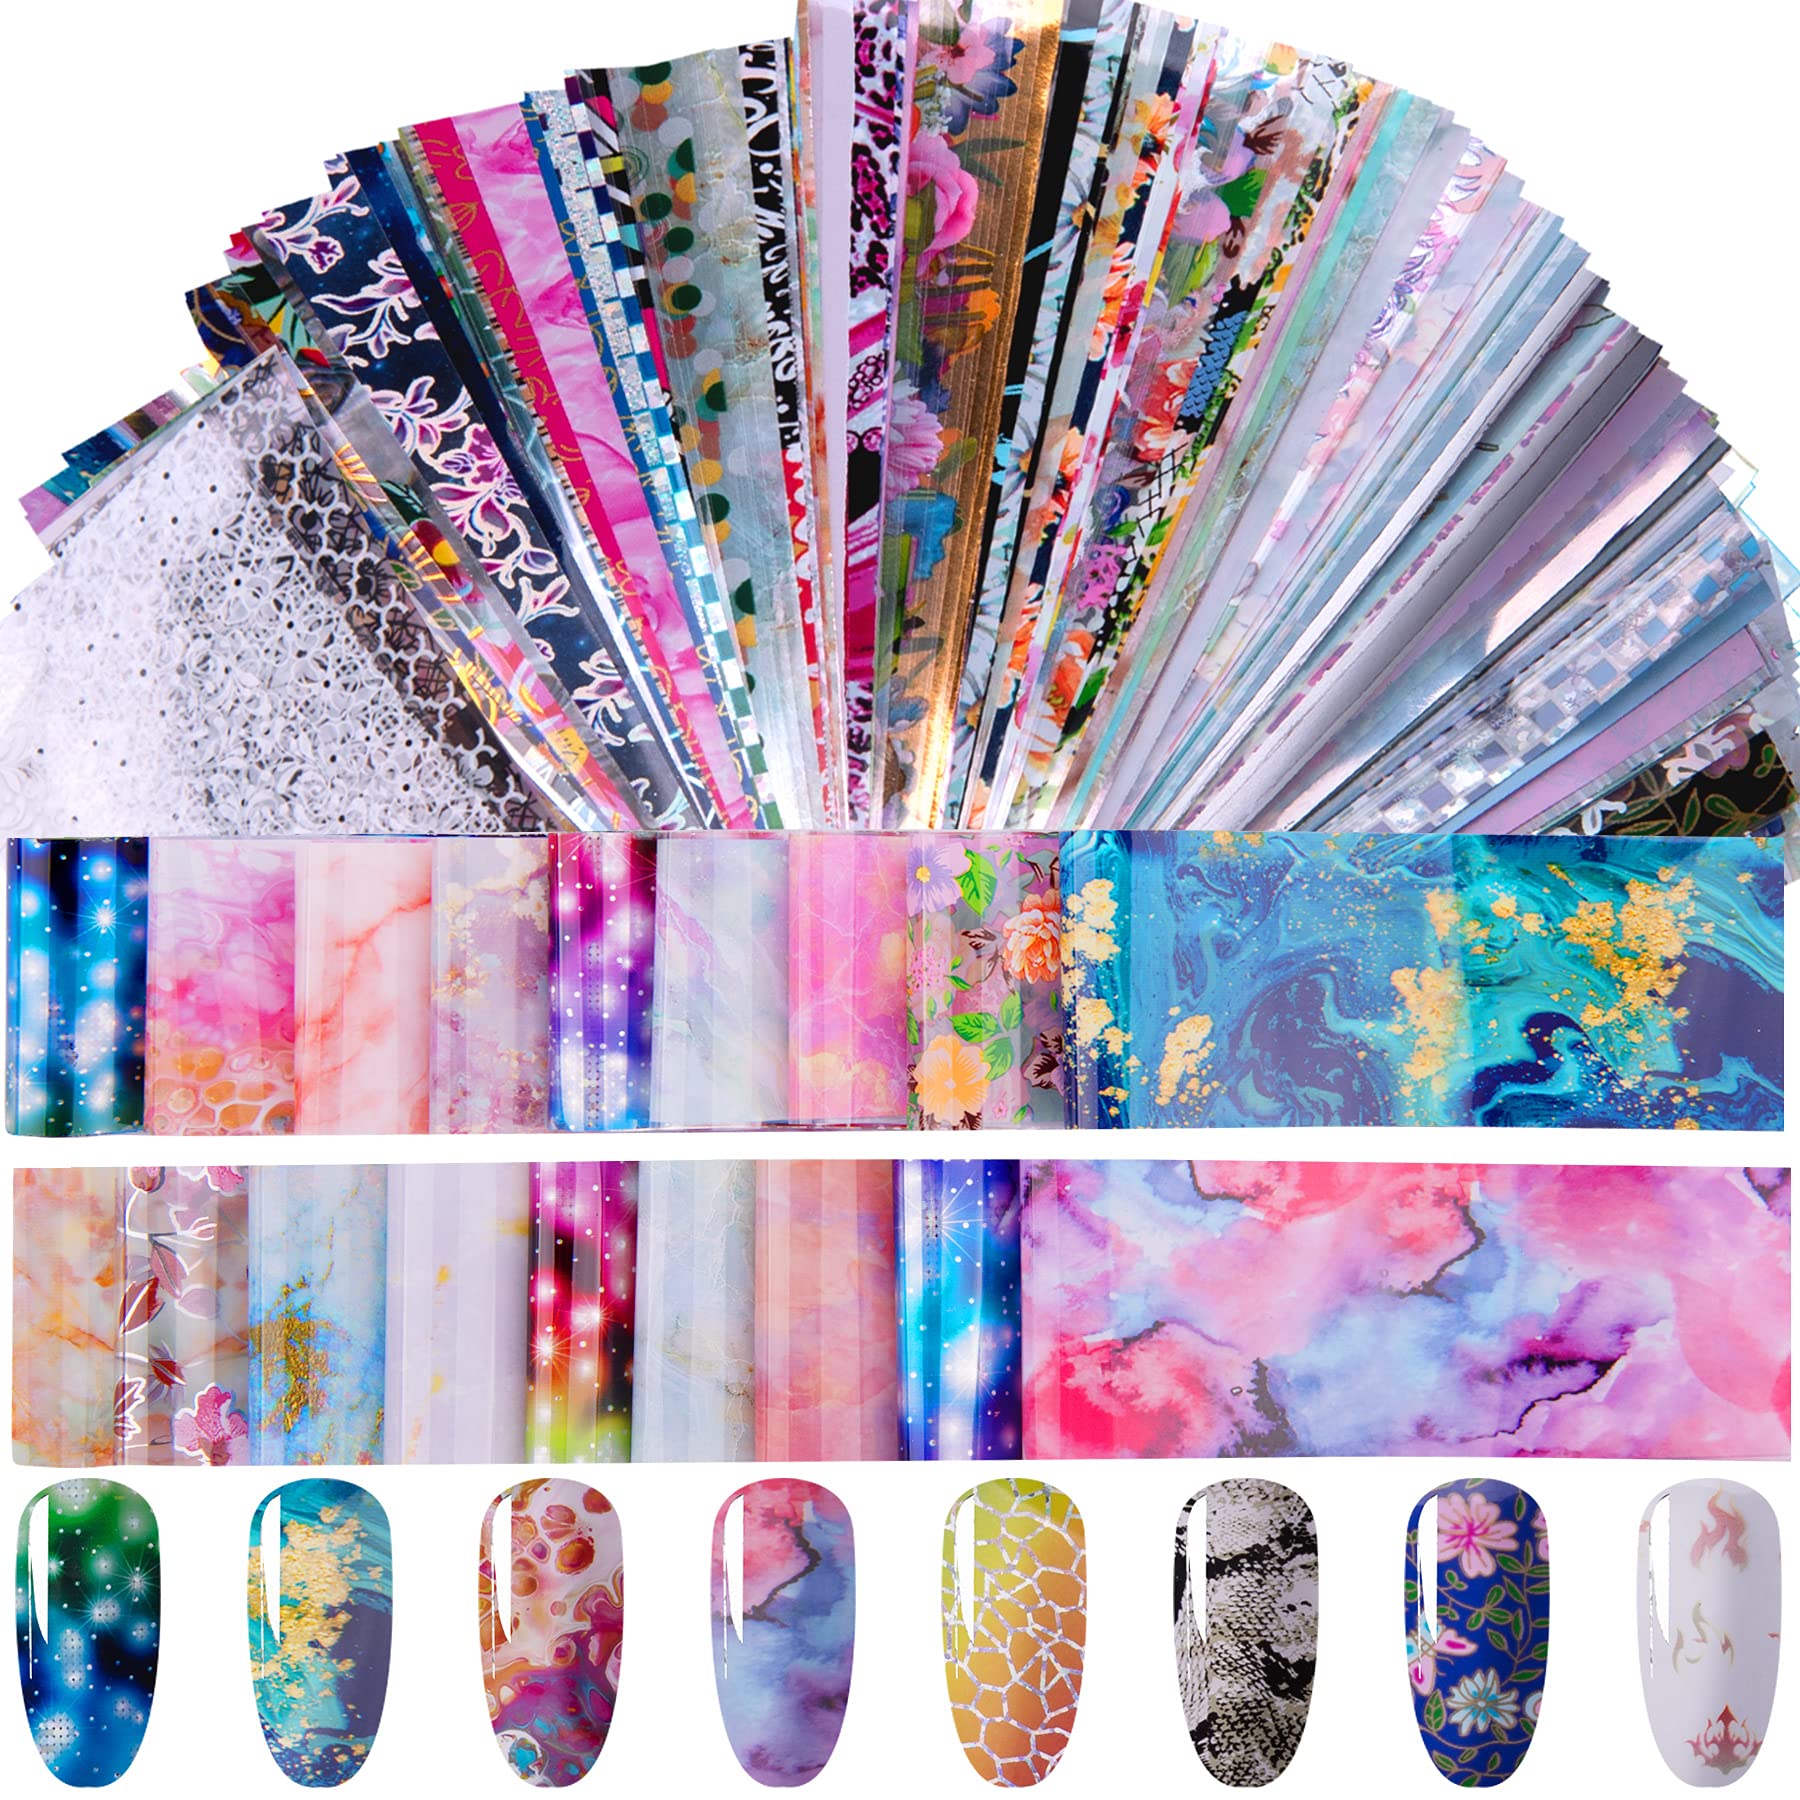 Duufin 200 Sheets Nail Art Foil Transfer Sticker Starry Sky Stars Laser Nail Foil Sticker for Nail Art Decoration DIY and Salon